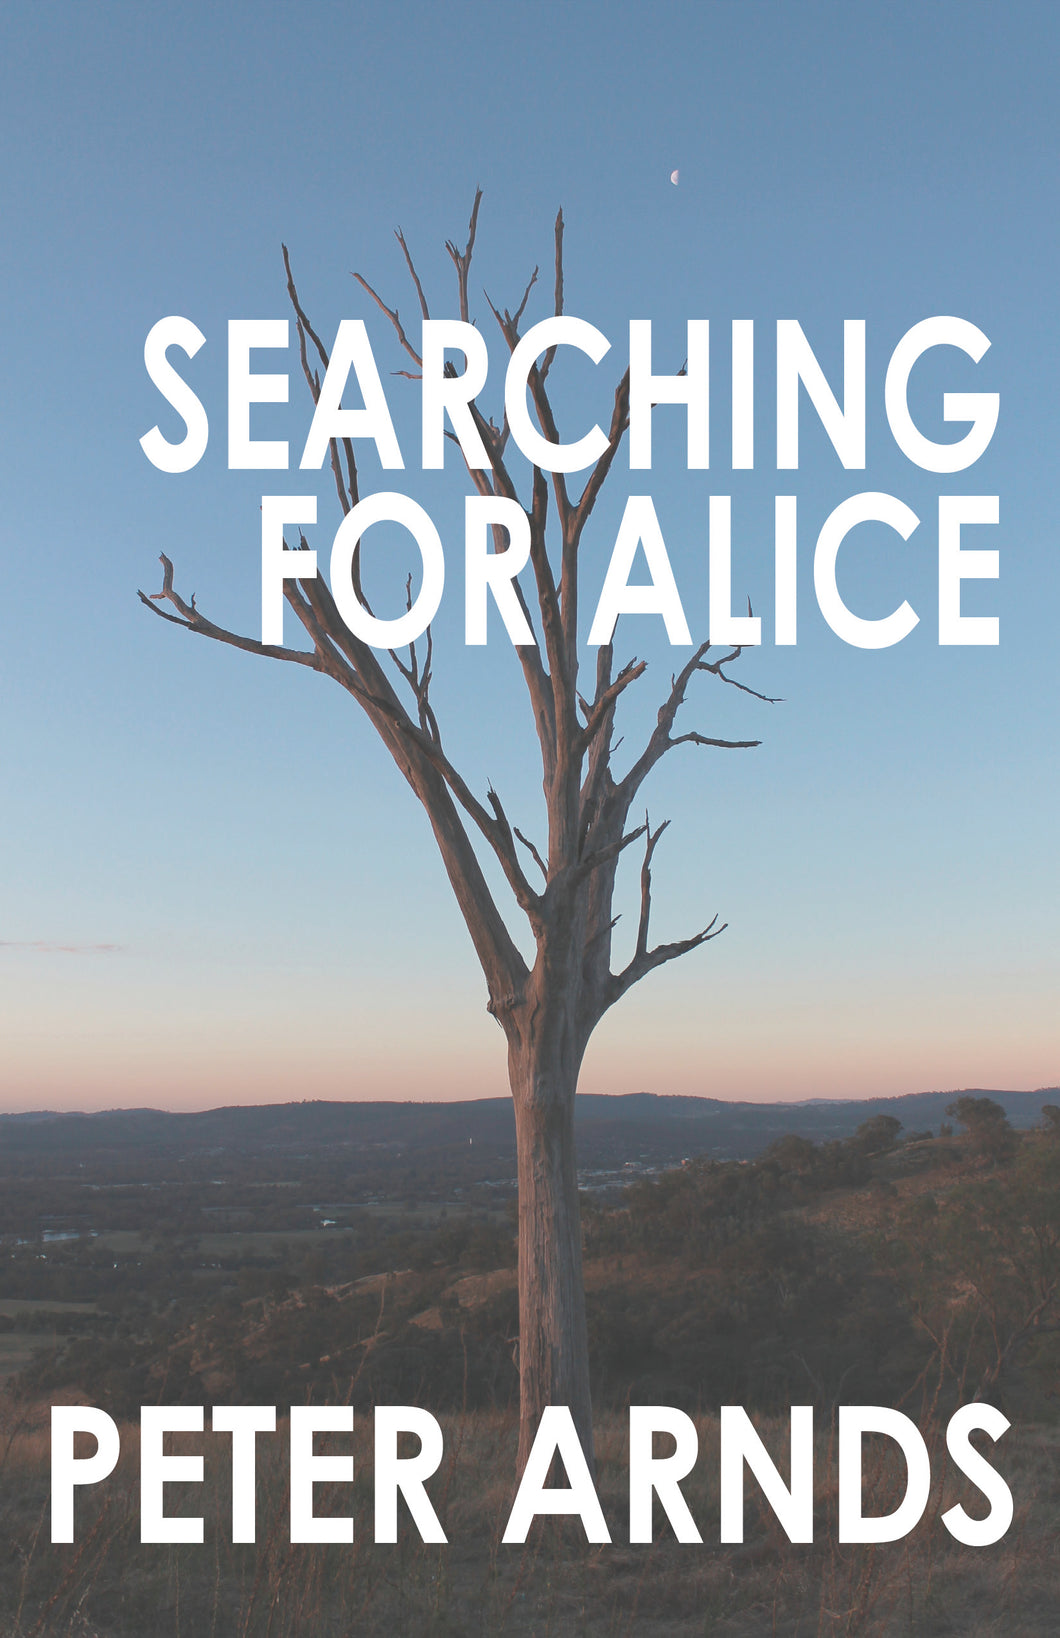 Searching for Alice